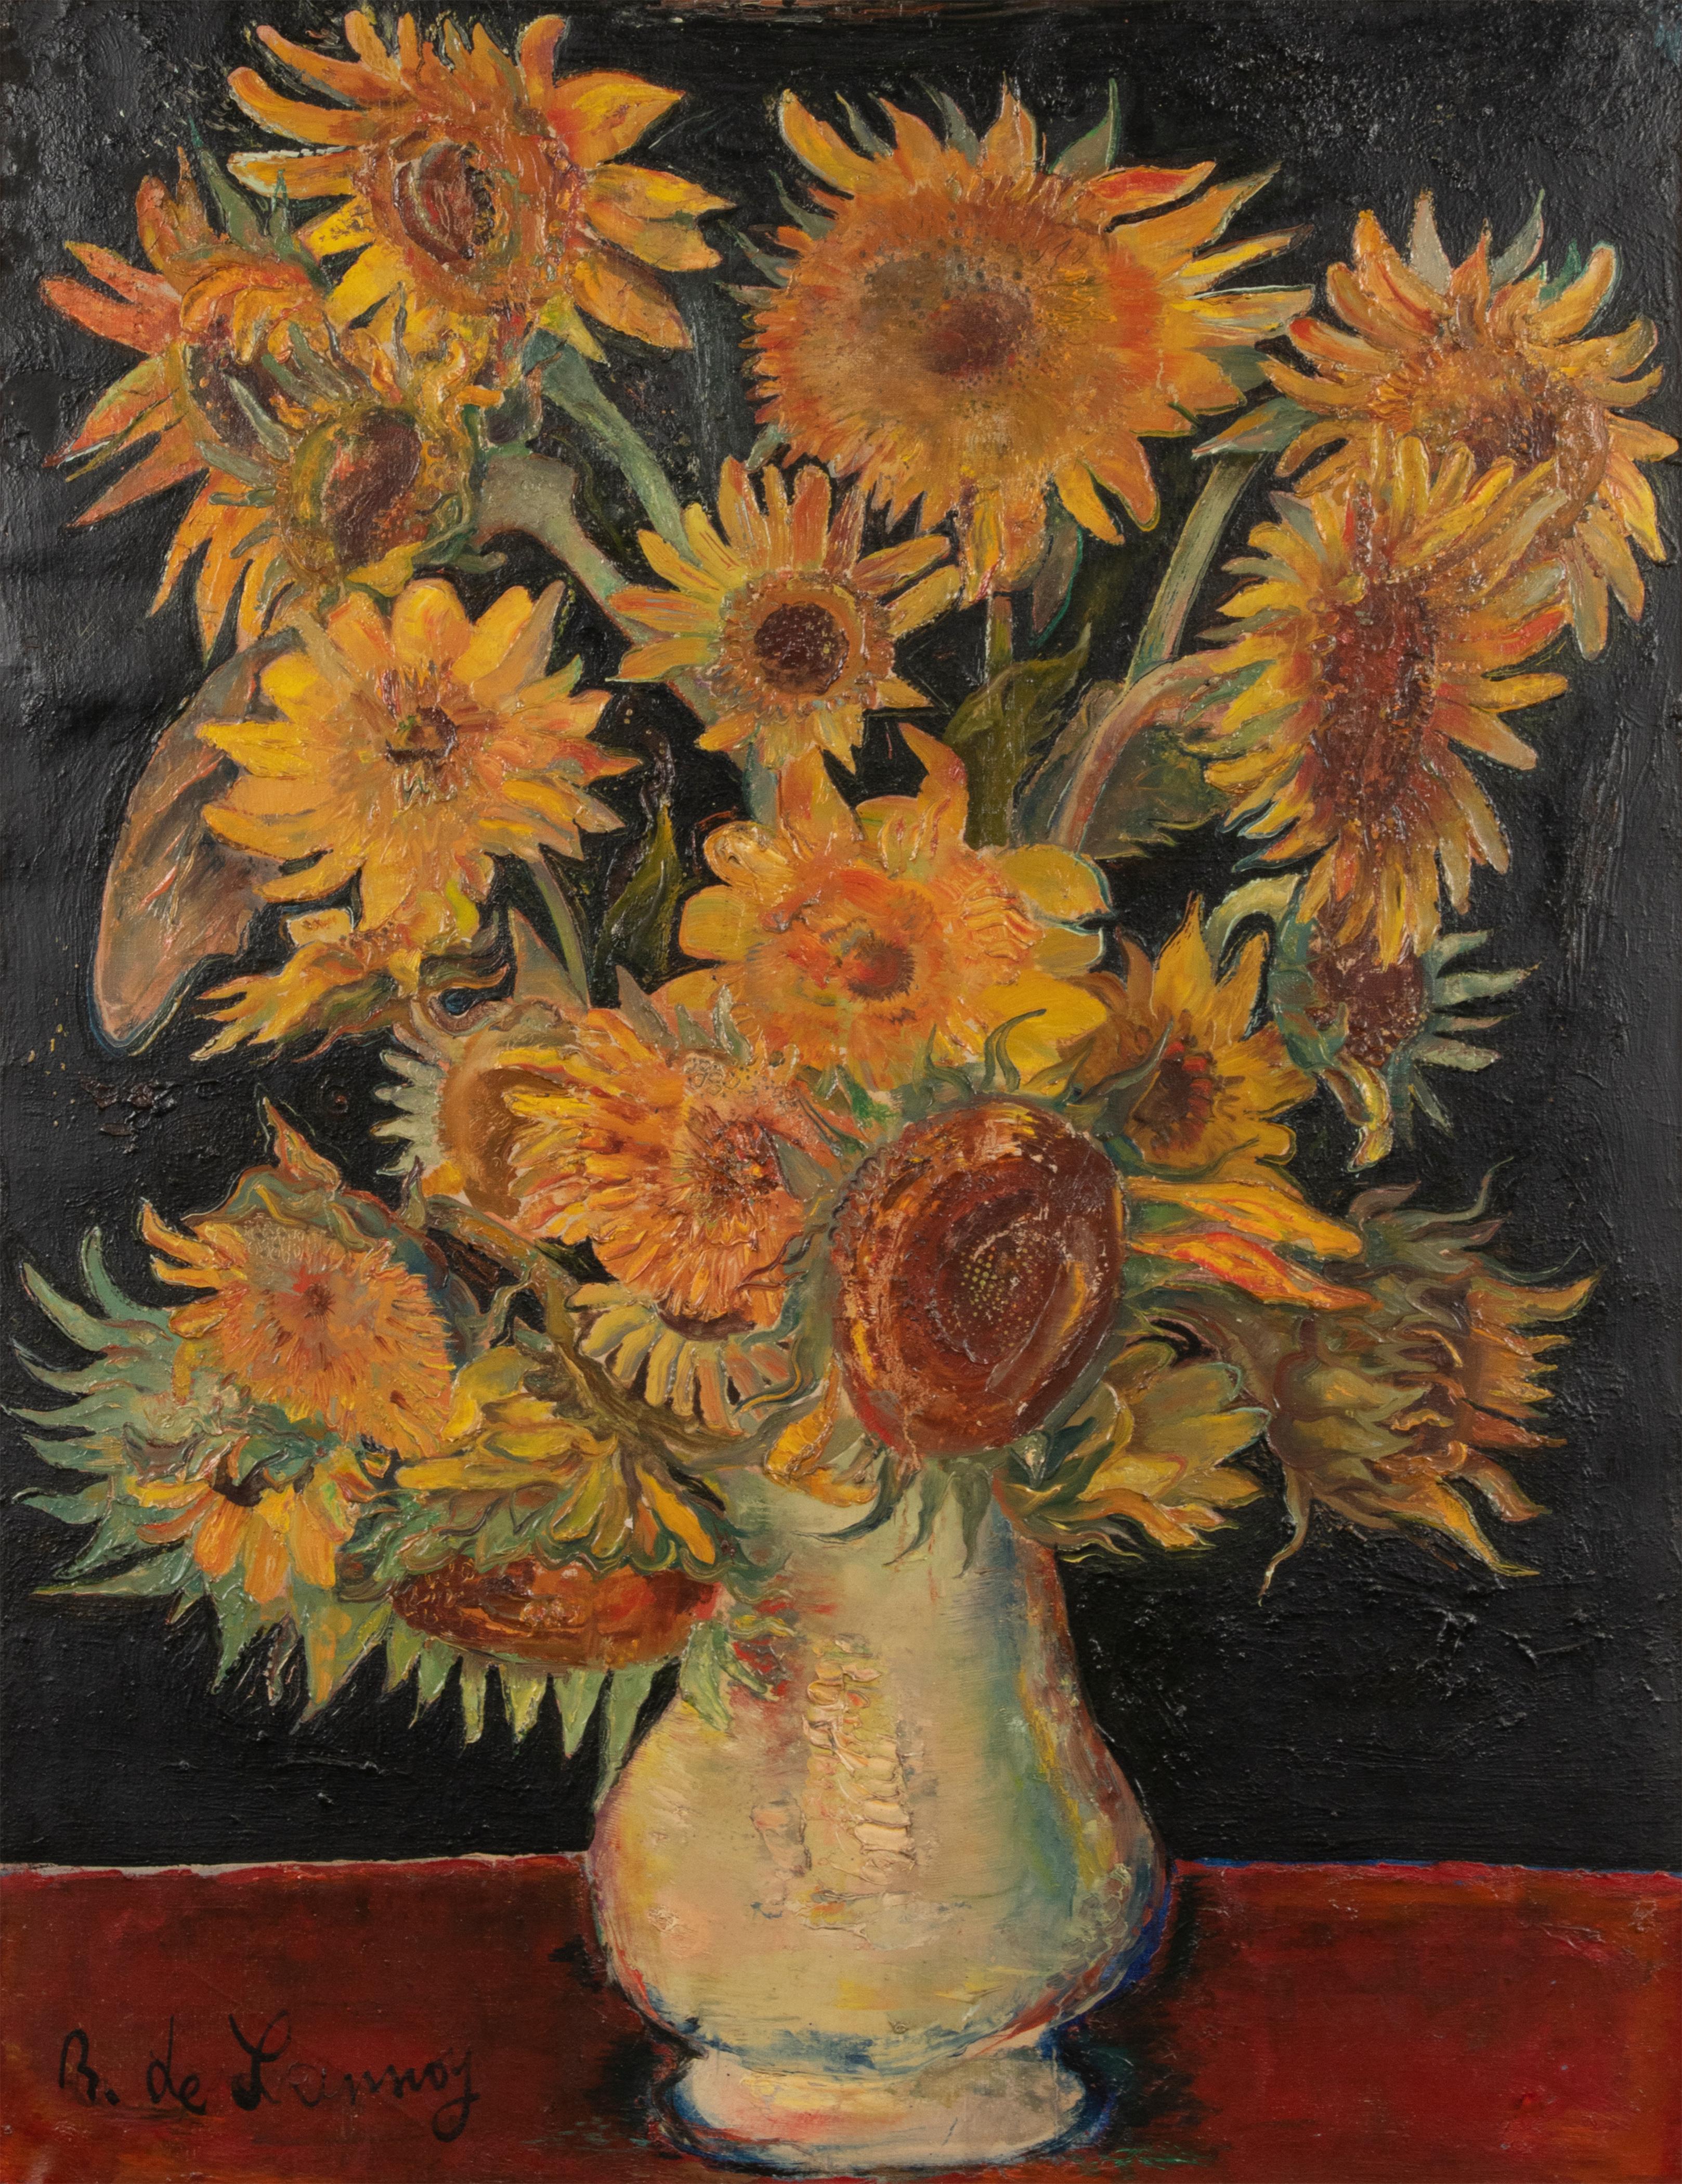 Mid-Century Modern Mid-20th Century, Oil Painting Flower Still Life with Sunflowers in a Vase For Sale